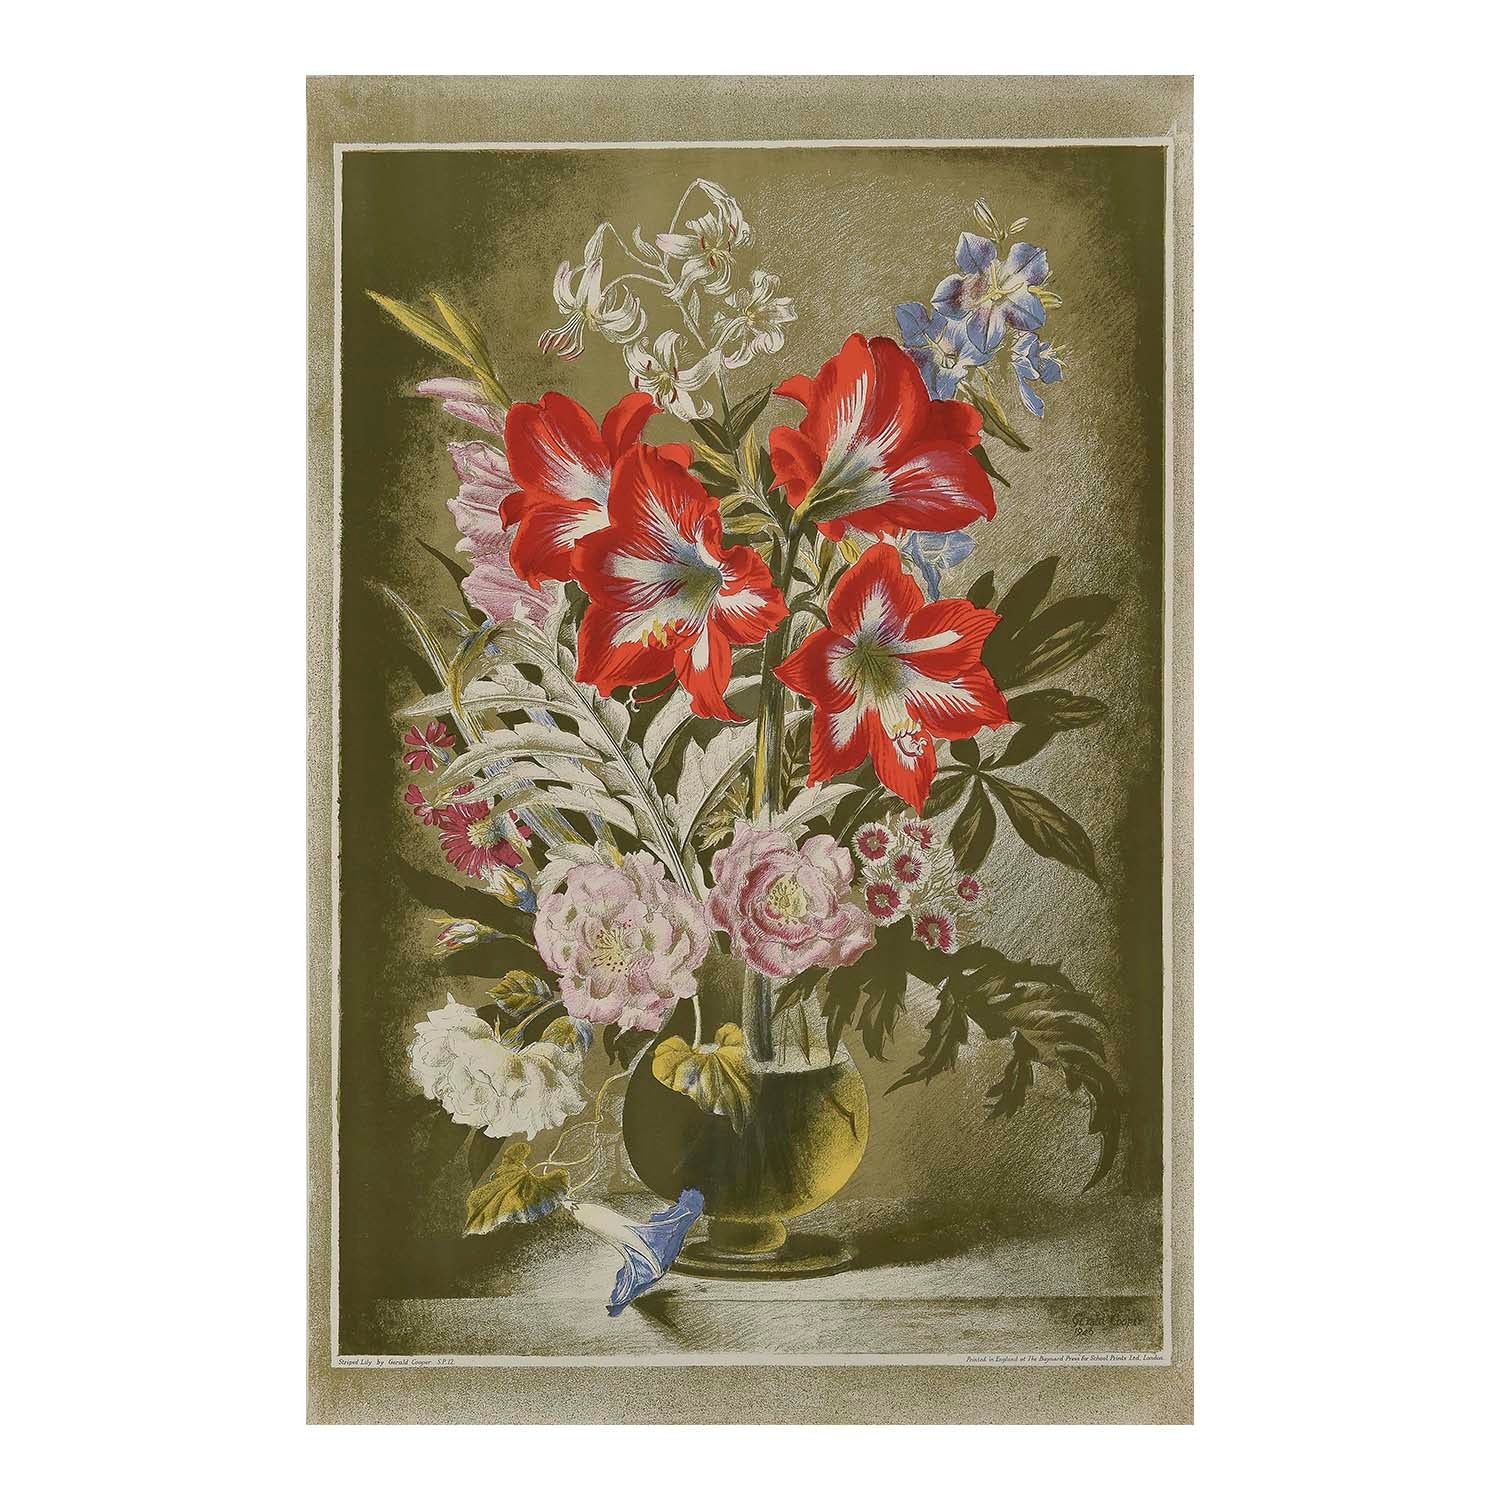 Original ‘School Print’, Striped Lily, painted by Gerald Cooper, and published by School Prints Ltd, 1946. The image depicts a glass vase with flowers, including lilies, gladioli, peonies, pinks and morning glory